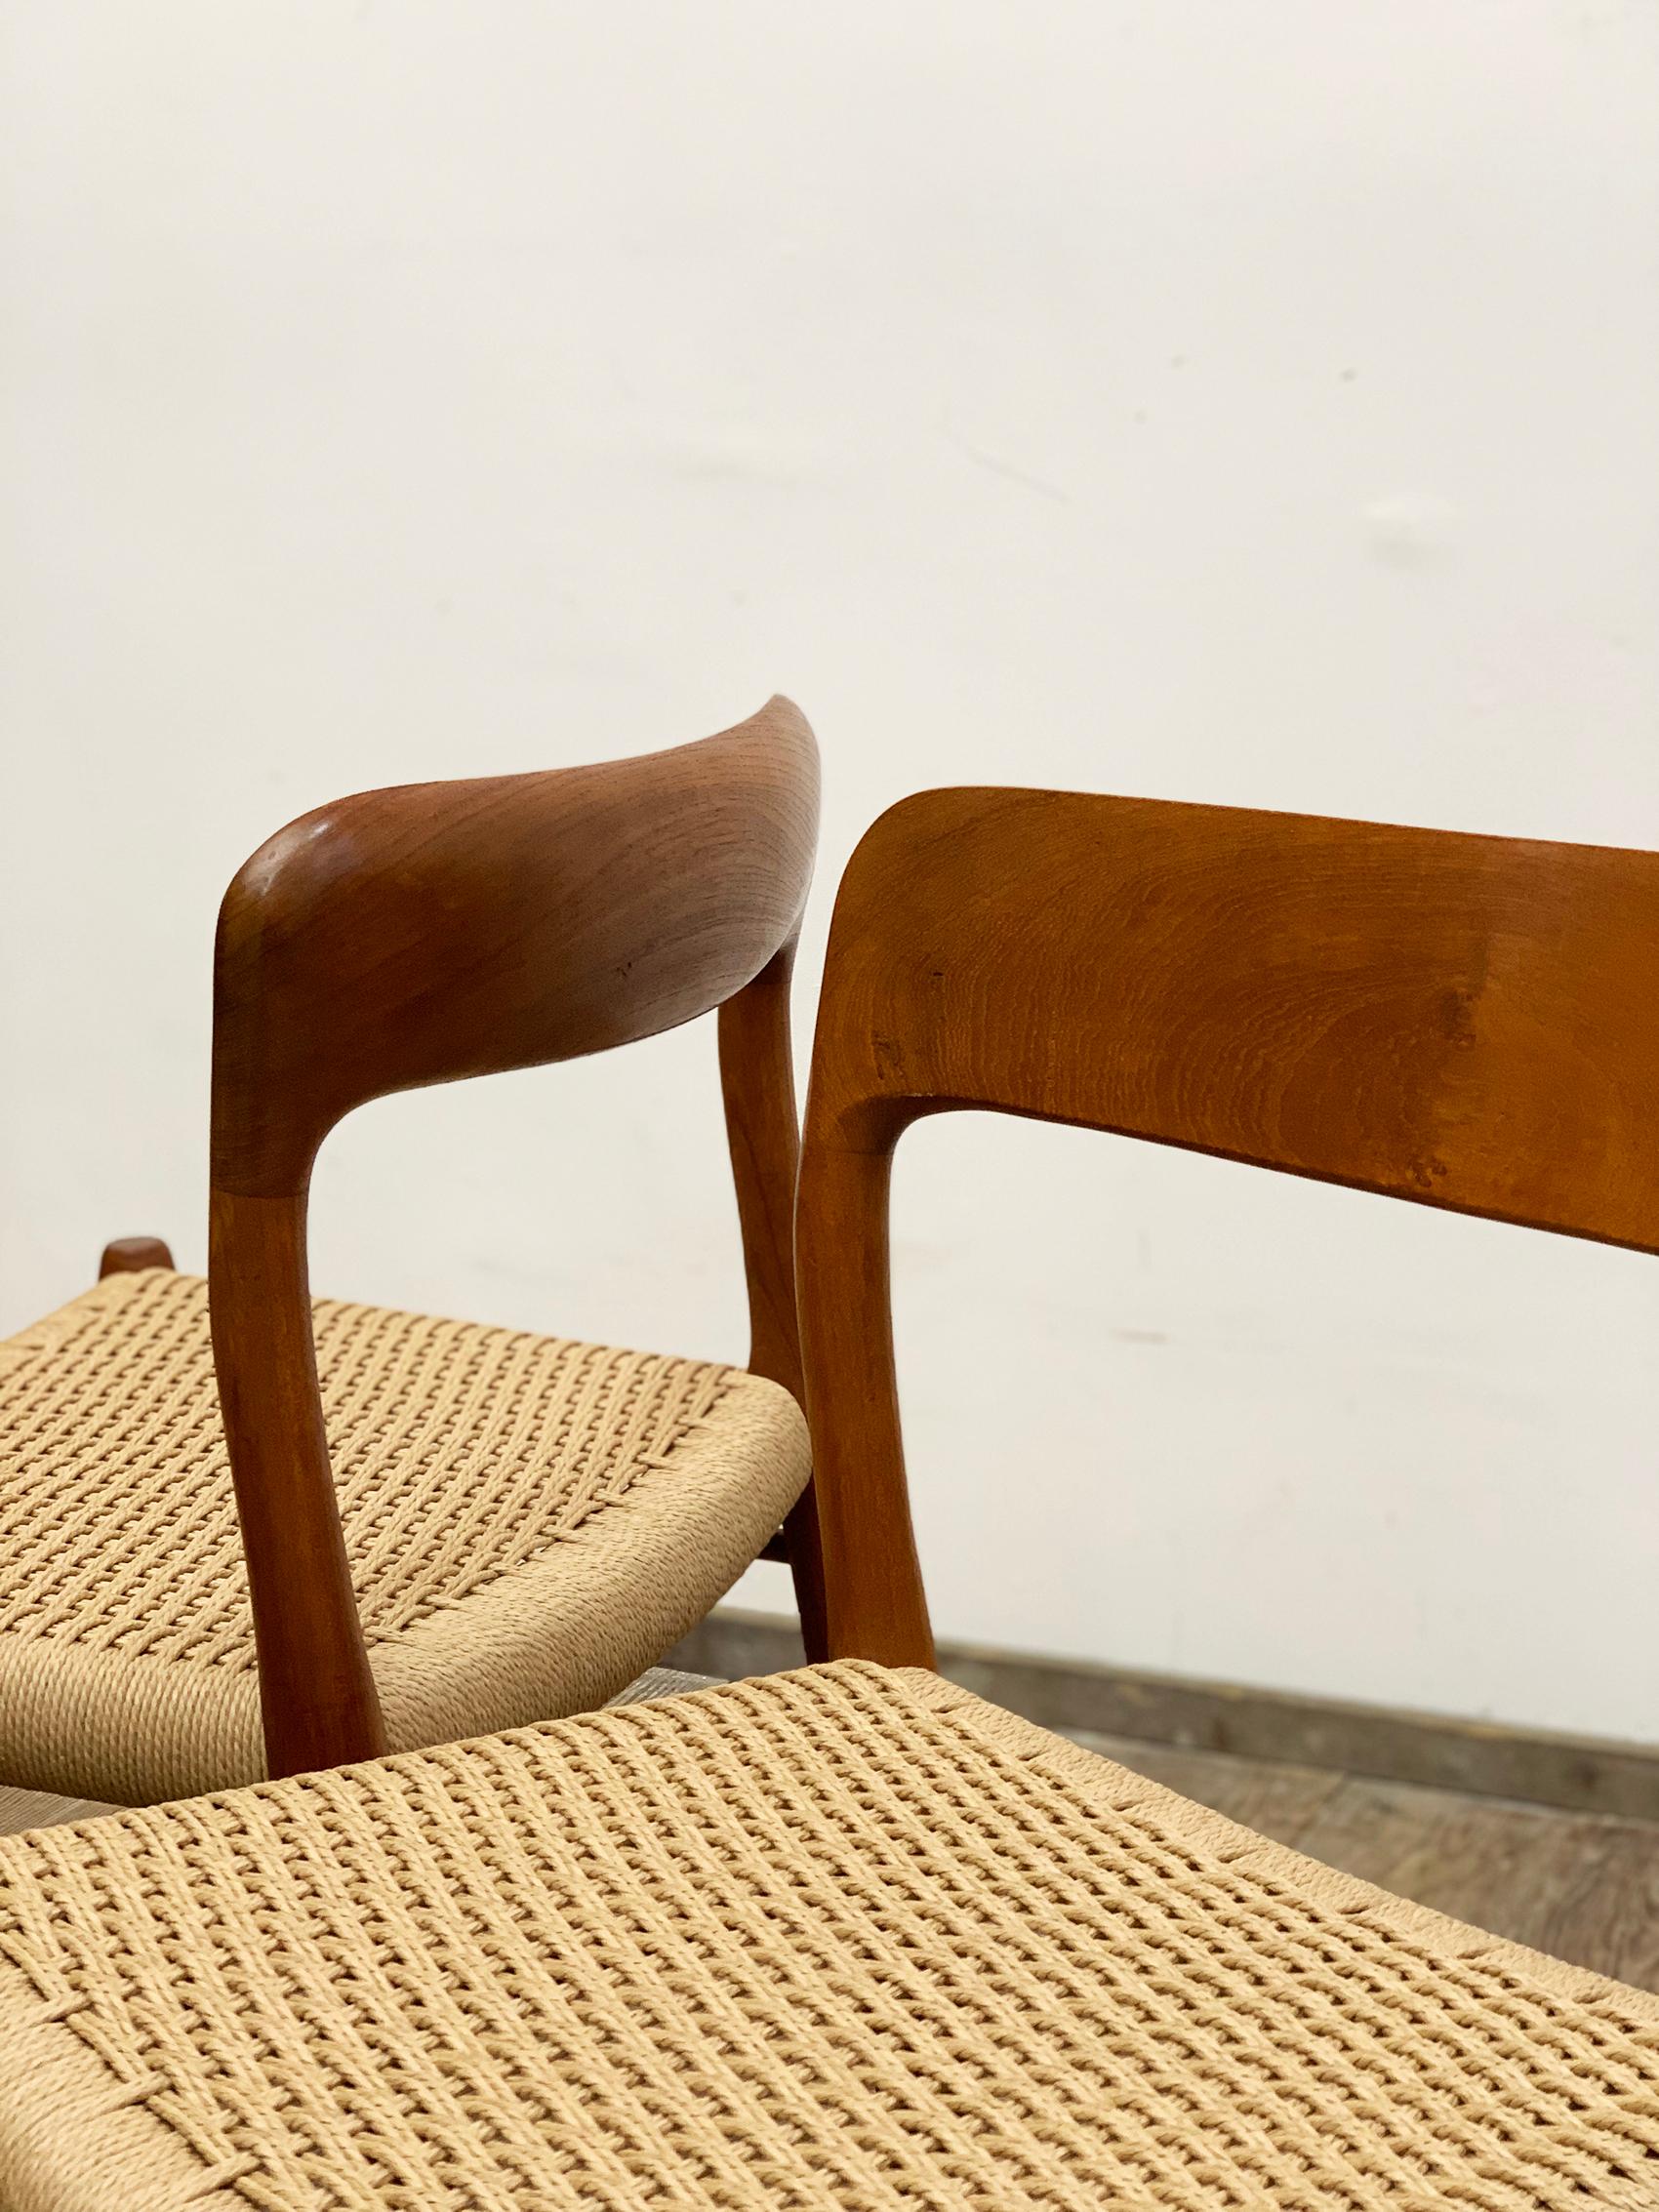 Midcentury Teak Dining Chairs #75 by Niels O. Møller for J. L. Moller, Set of 4 In Good Condition For Sale In München, Bavaria